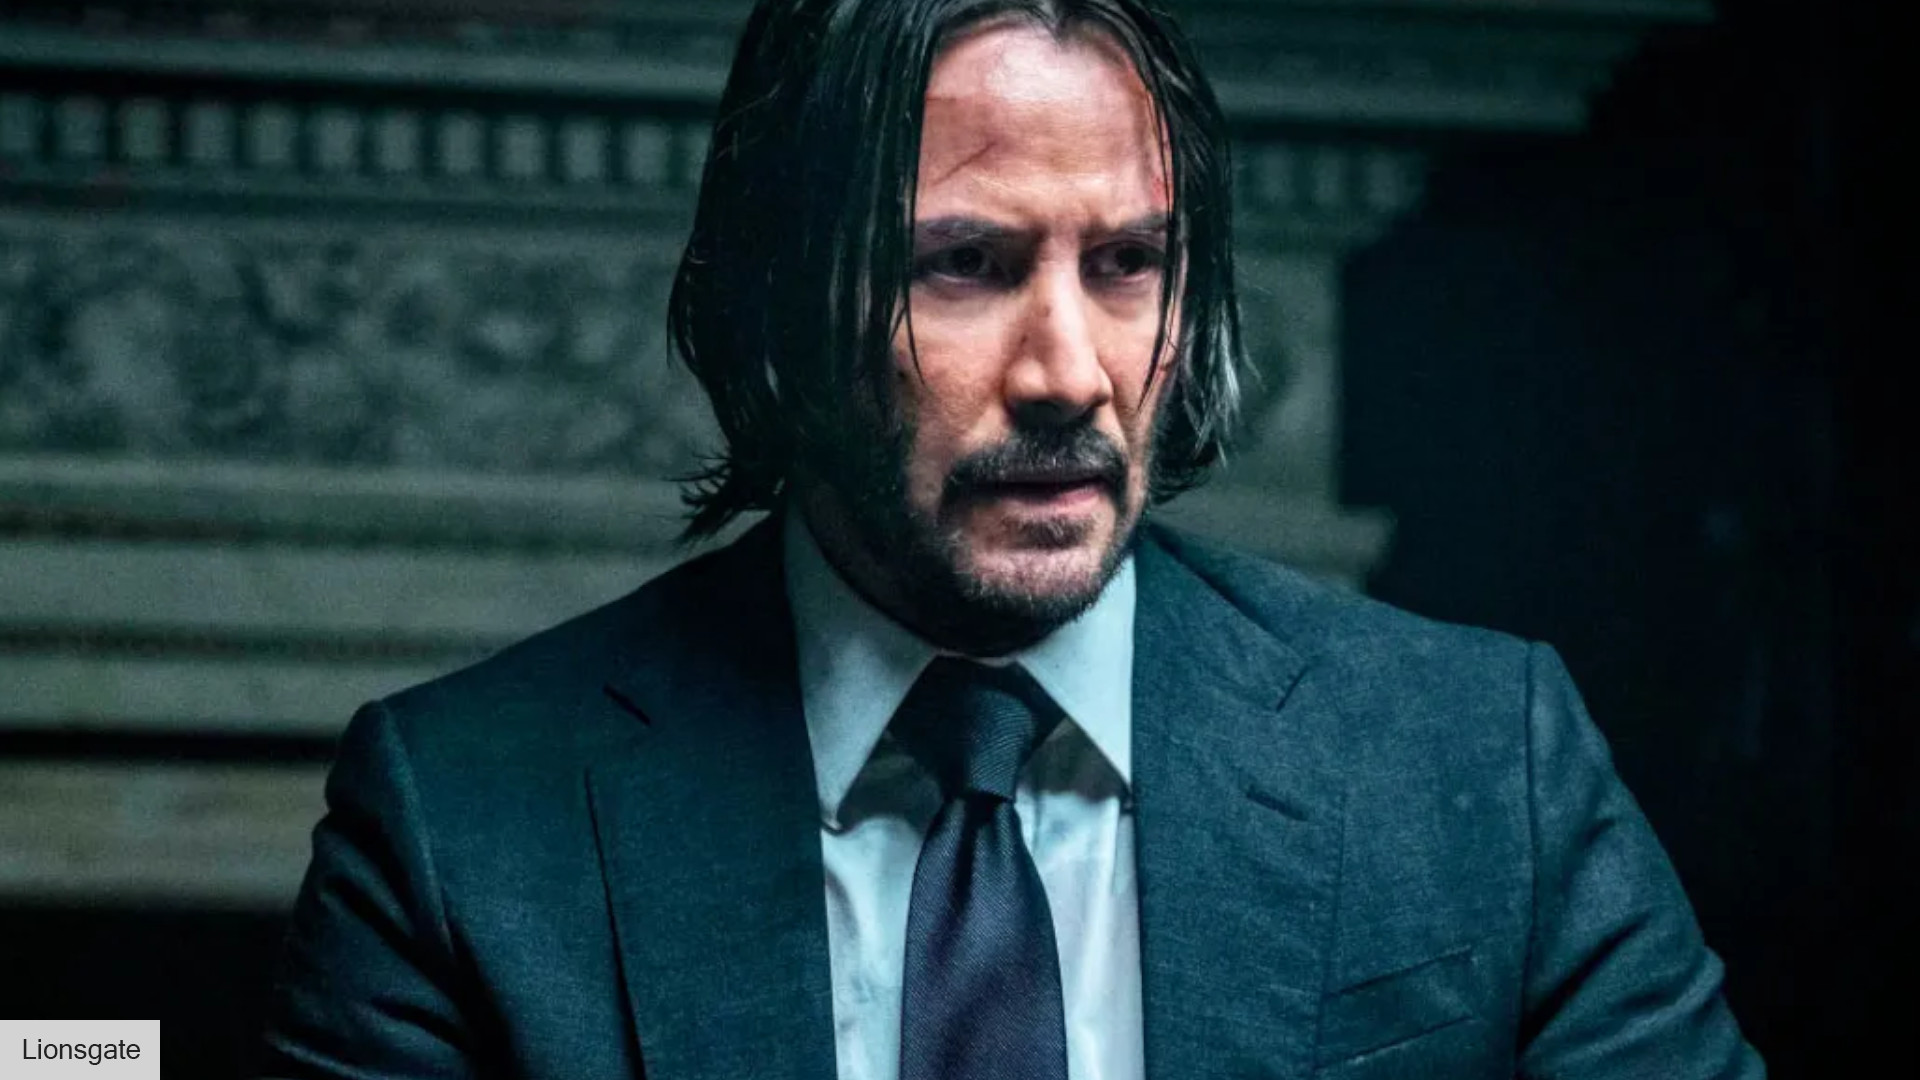 John Wick's prequel is coming to Peacock in 2023 - The Verge